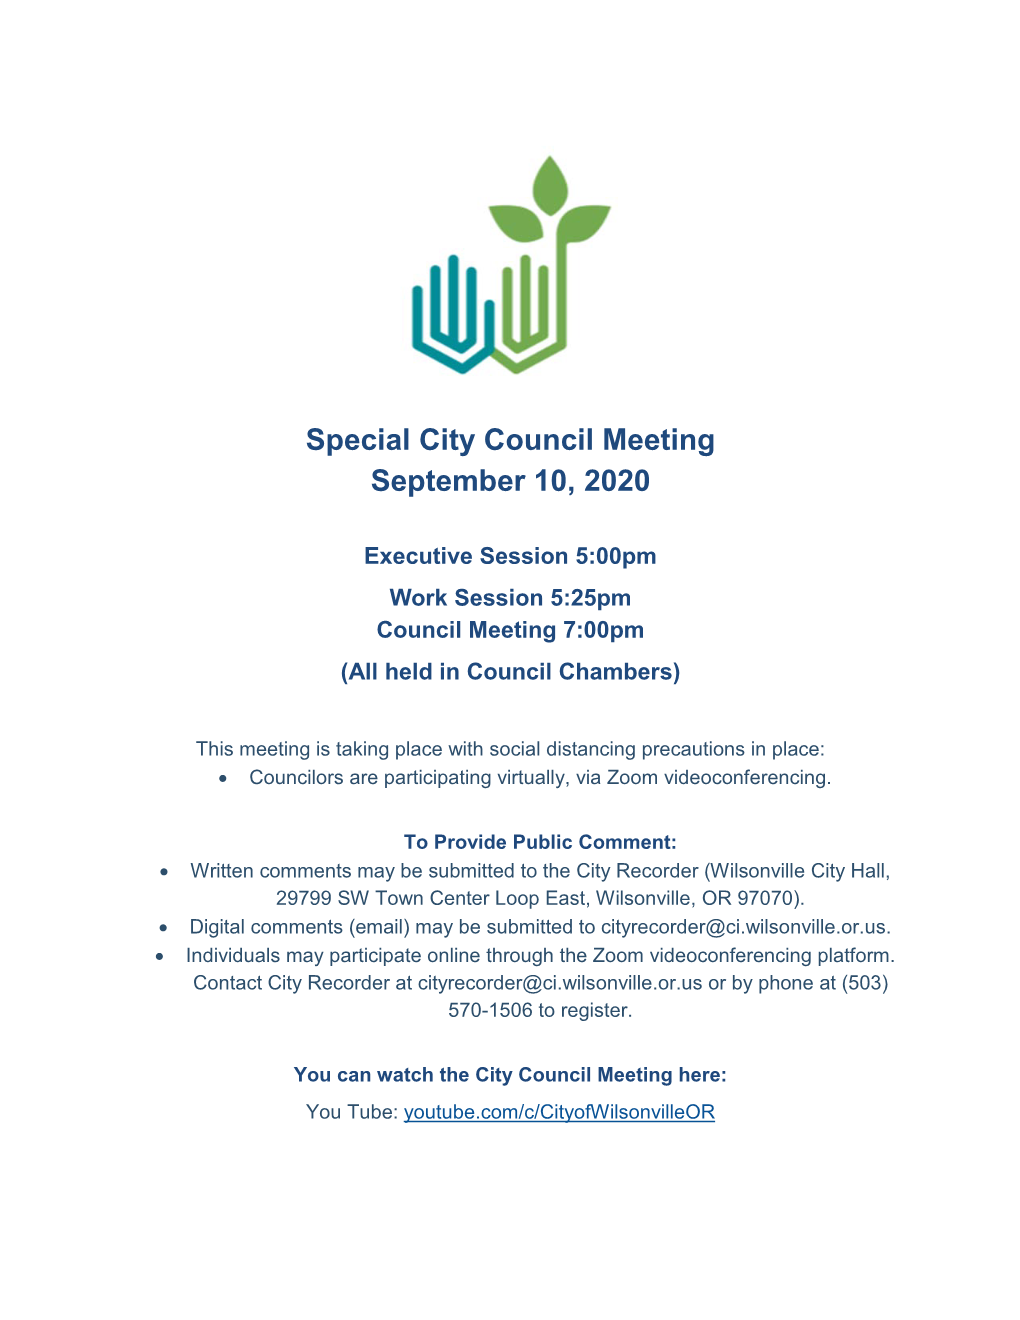 Special City Council Meeting September 10, 2020